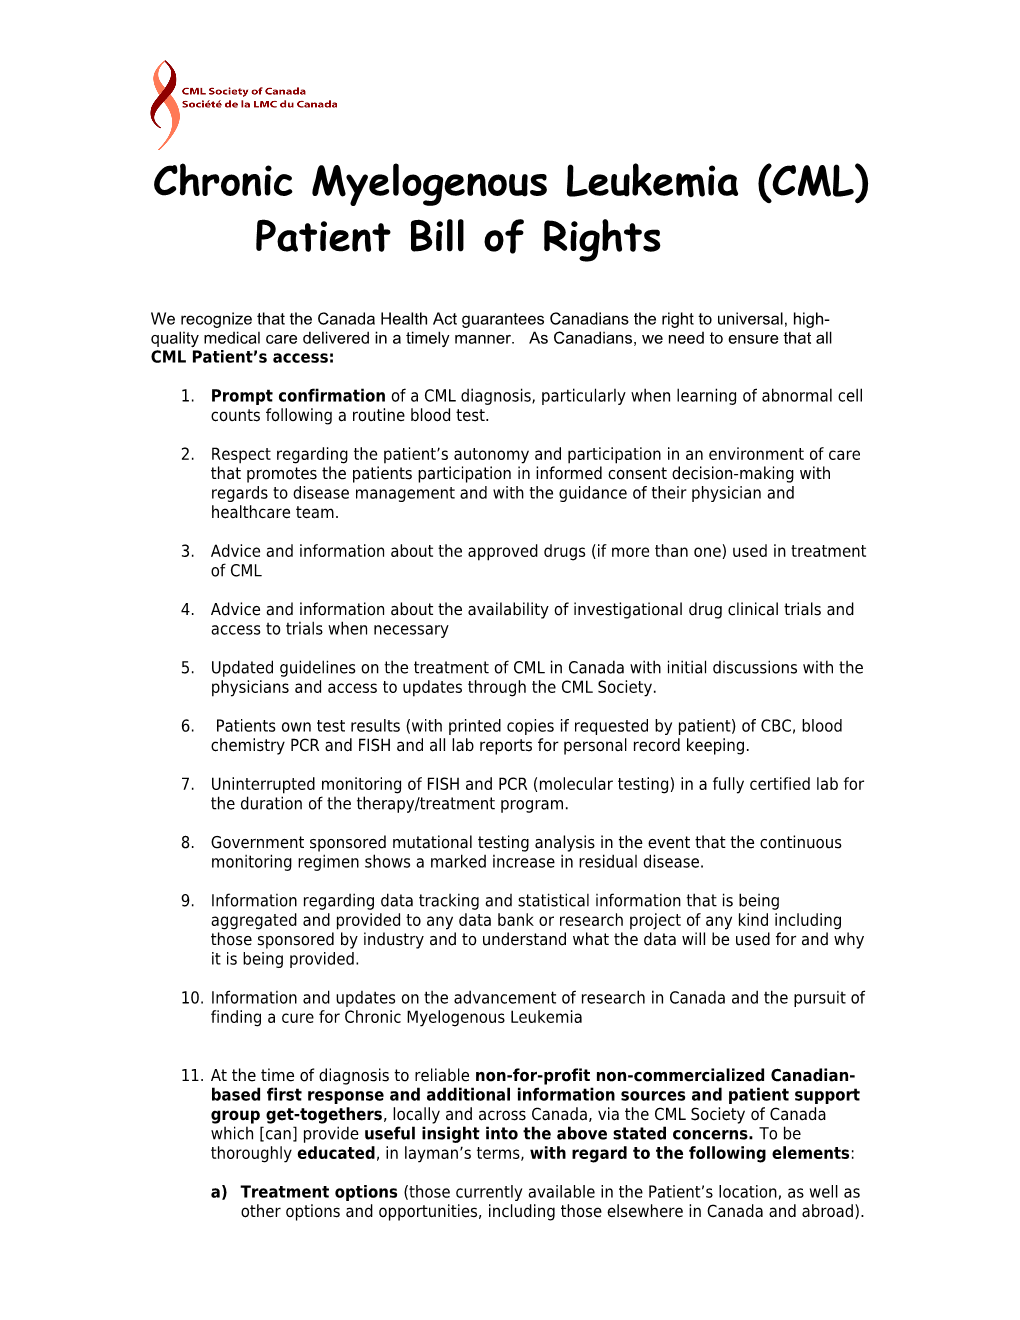 Chronic Myelogenous Leukemia(CML) Patient Bill of Rights